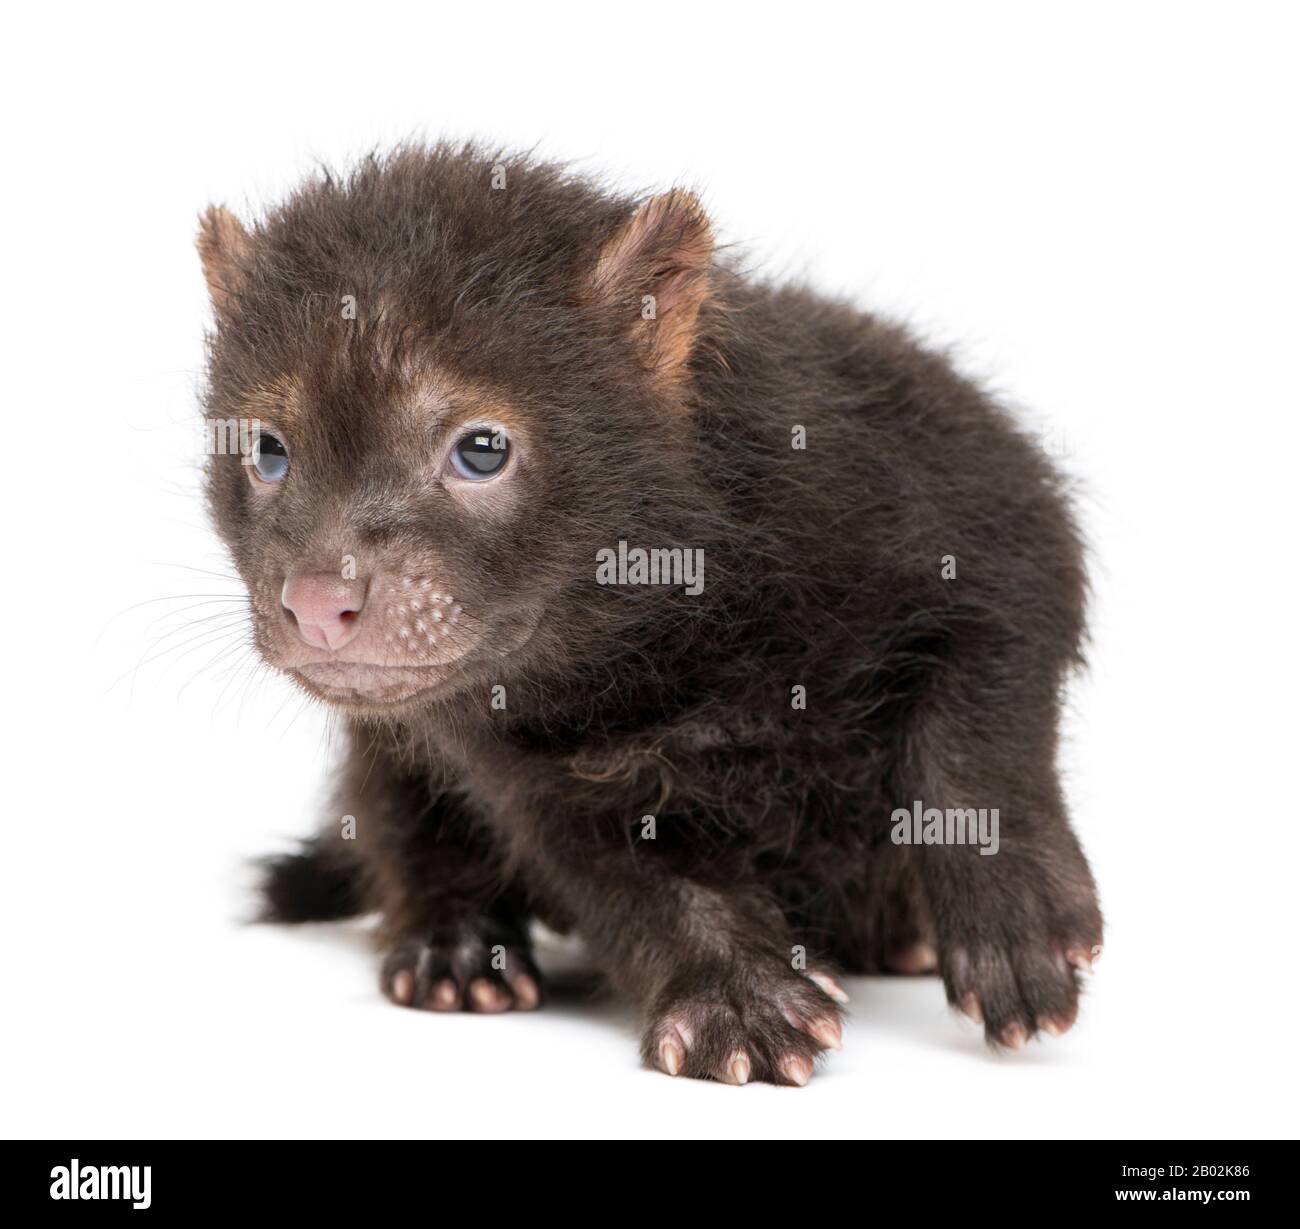 Front view of a baby Bushdog looking at the camera, Speothos venaticus, 2 months old, isolated on white Stock Photo